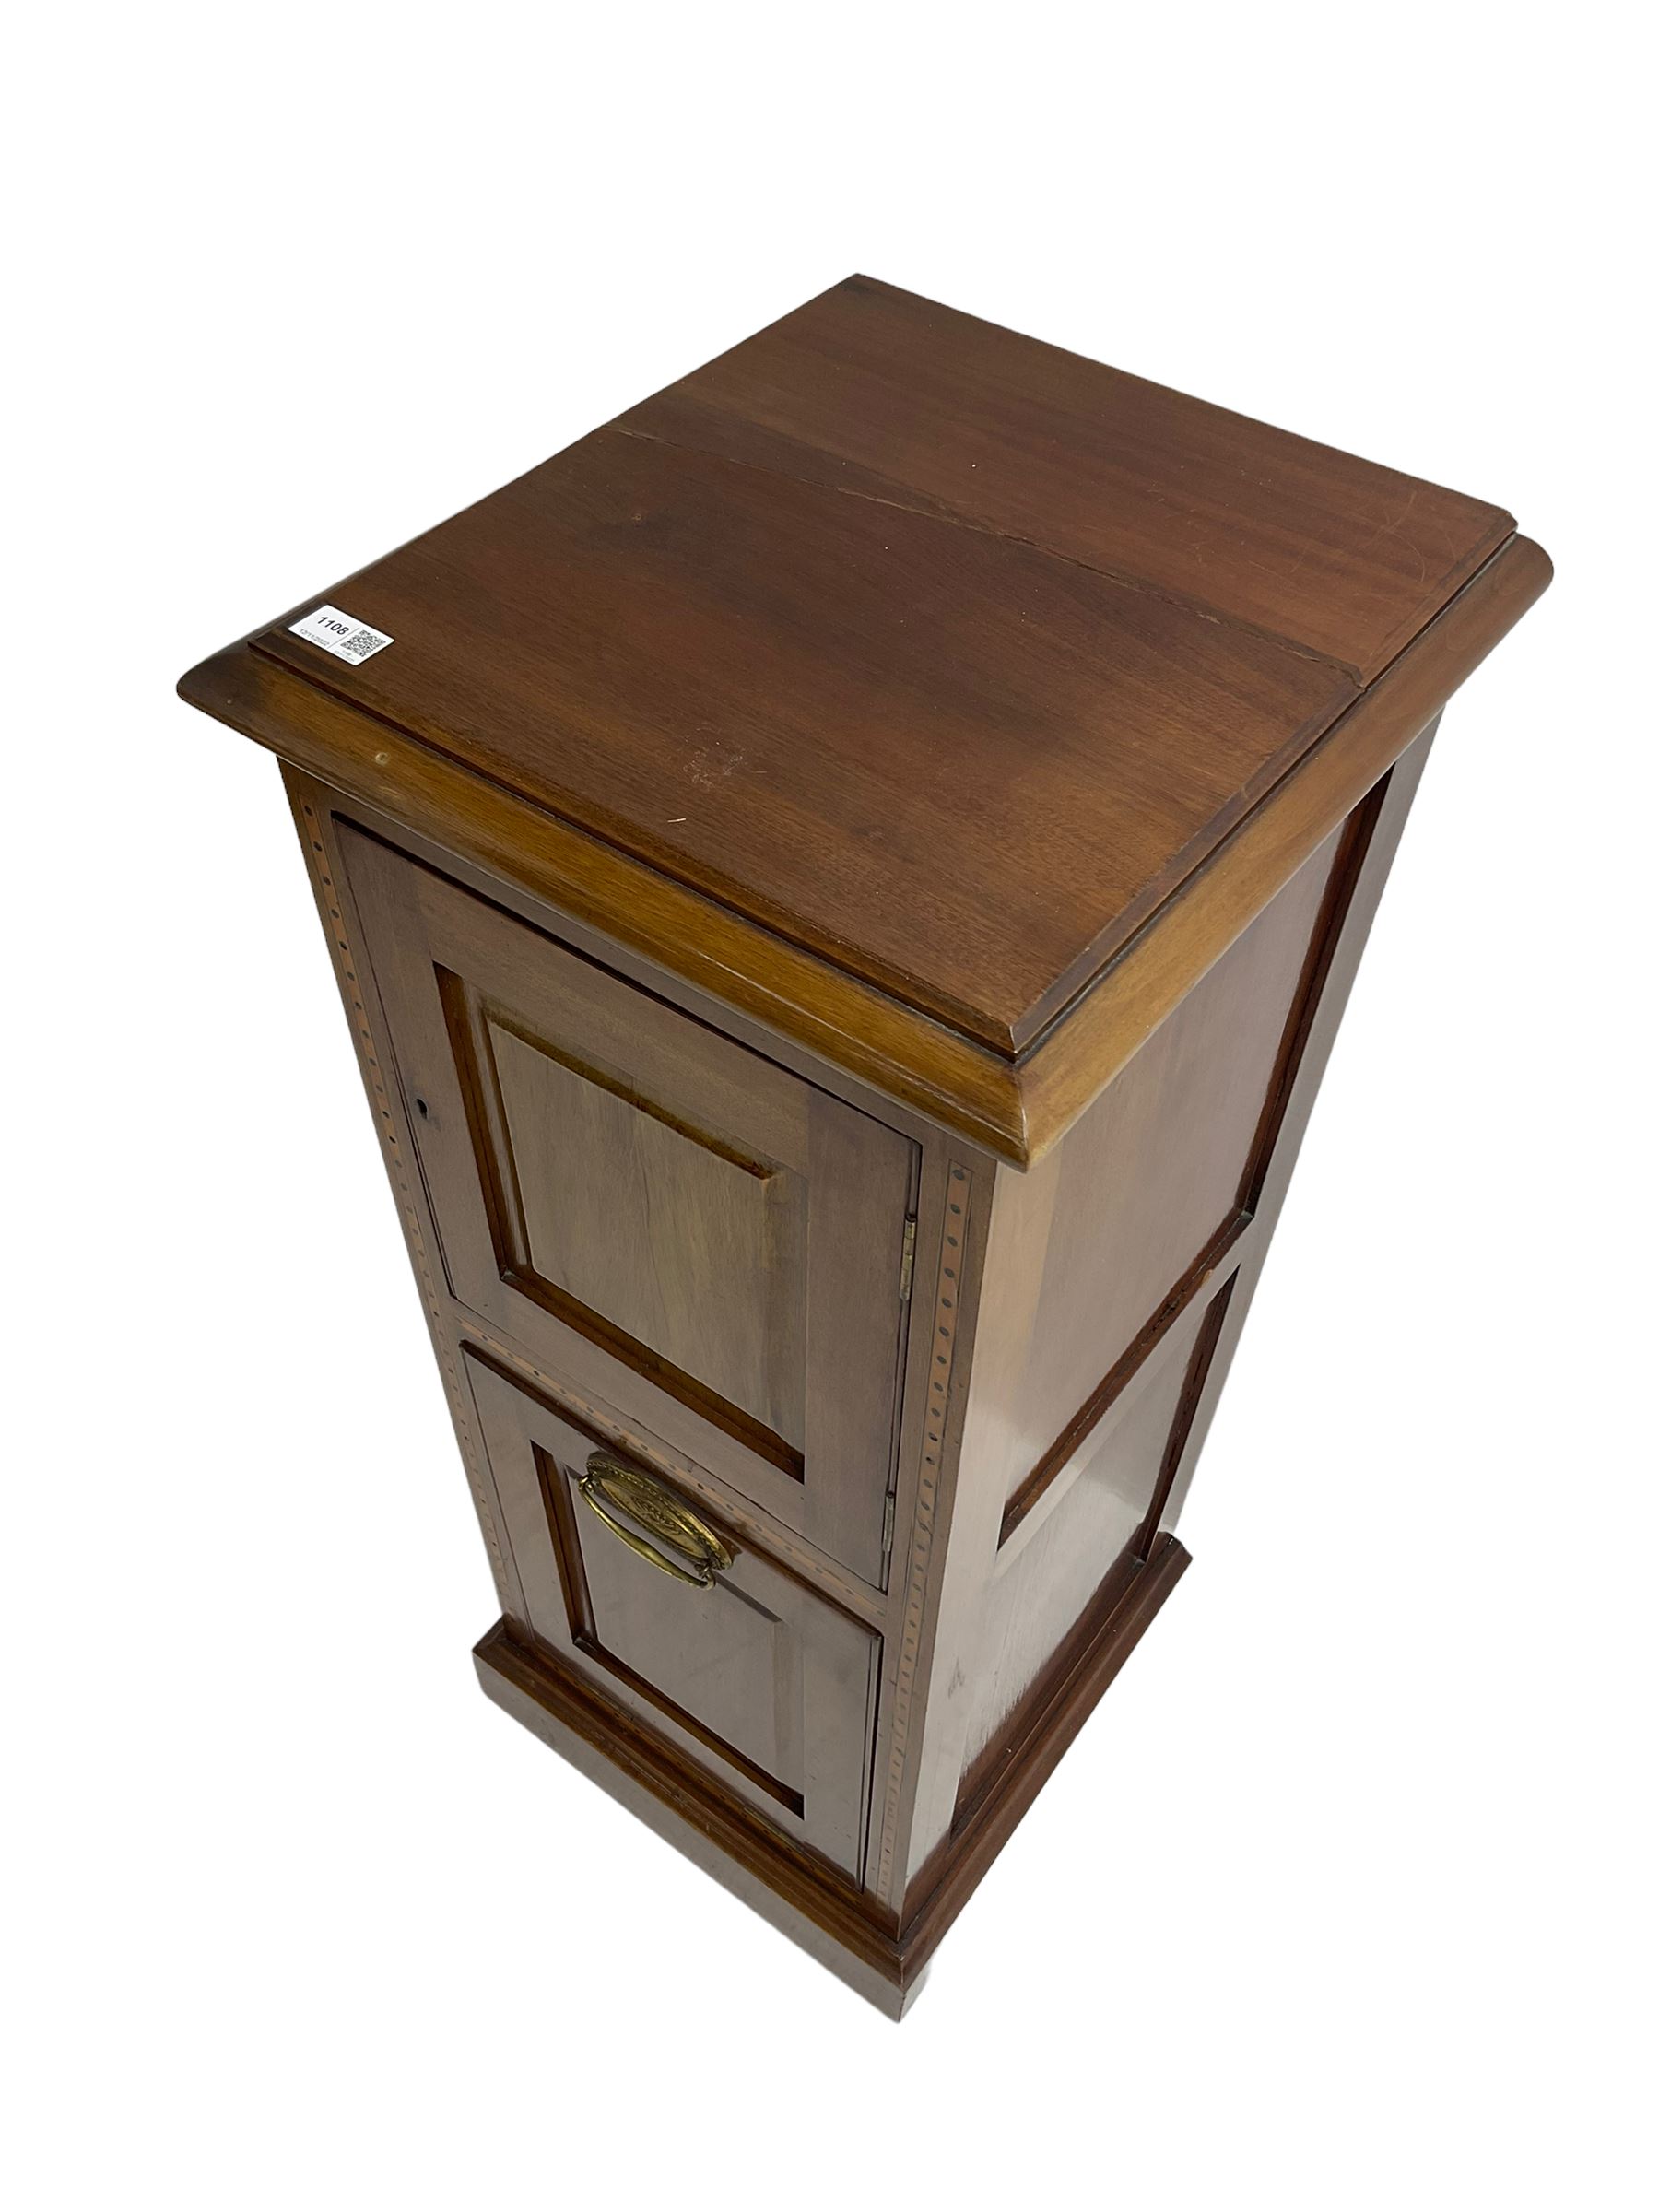 Early to mid-20th century inlaid mahogany coal compendium cabinet - Image 3 of 7